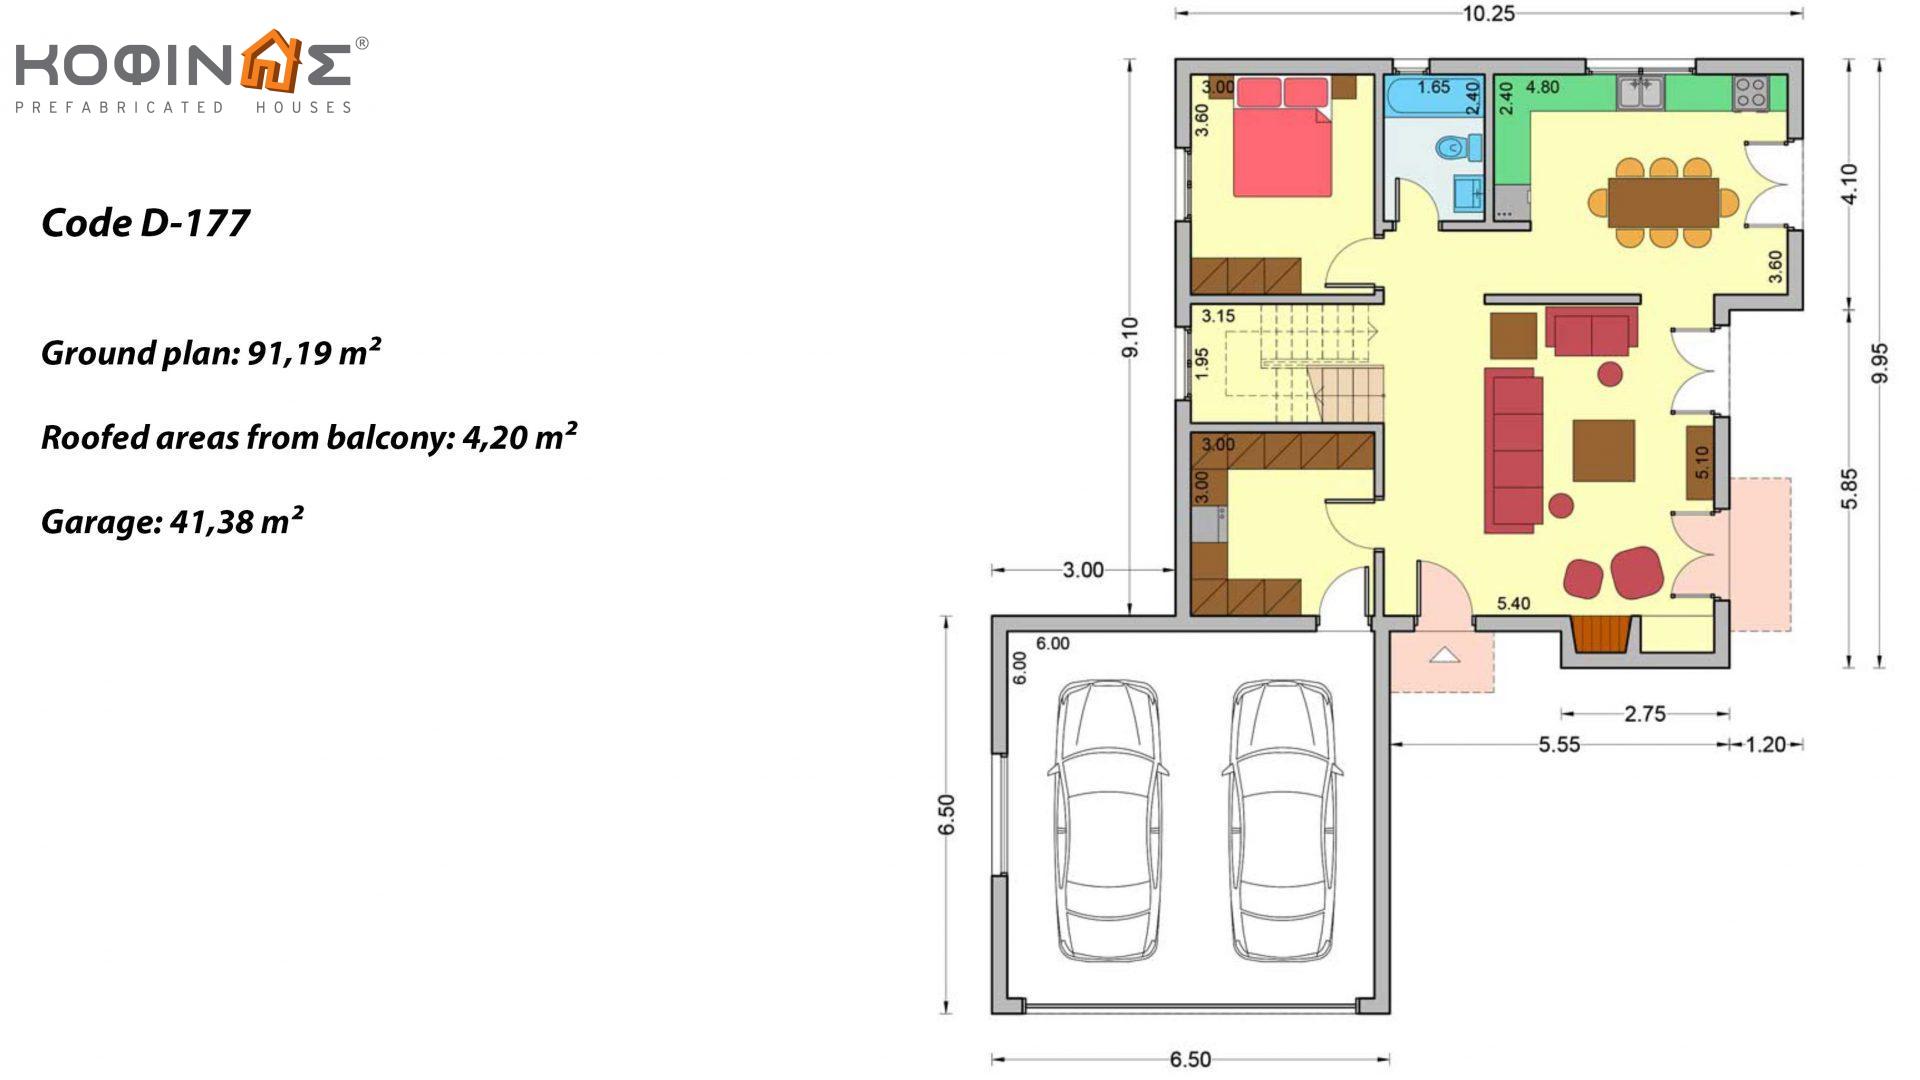 2-story house D-177, total surface of 177,46 m², +Garage 41.38 m²(=218.84 m²),covered roofed areas 4.20 m²,balconies 17.04 m²